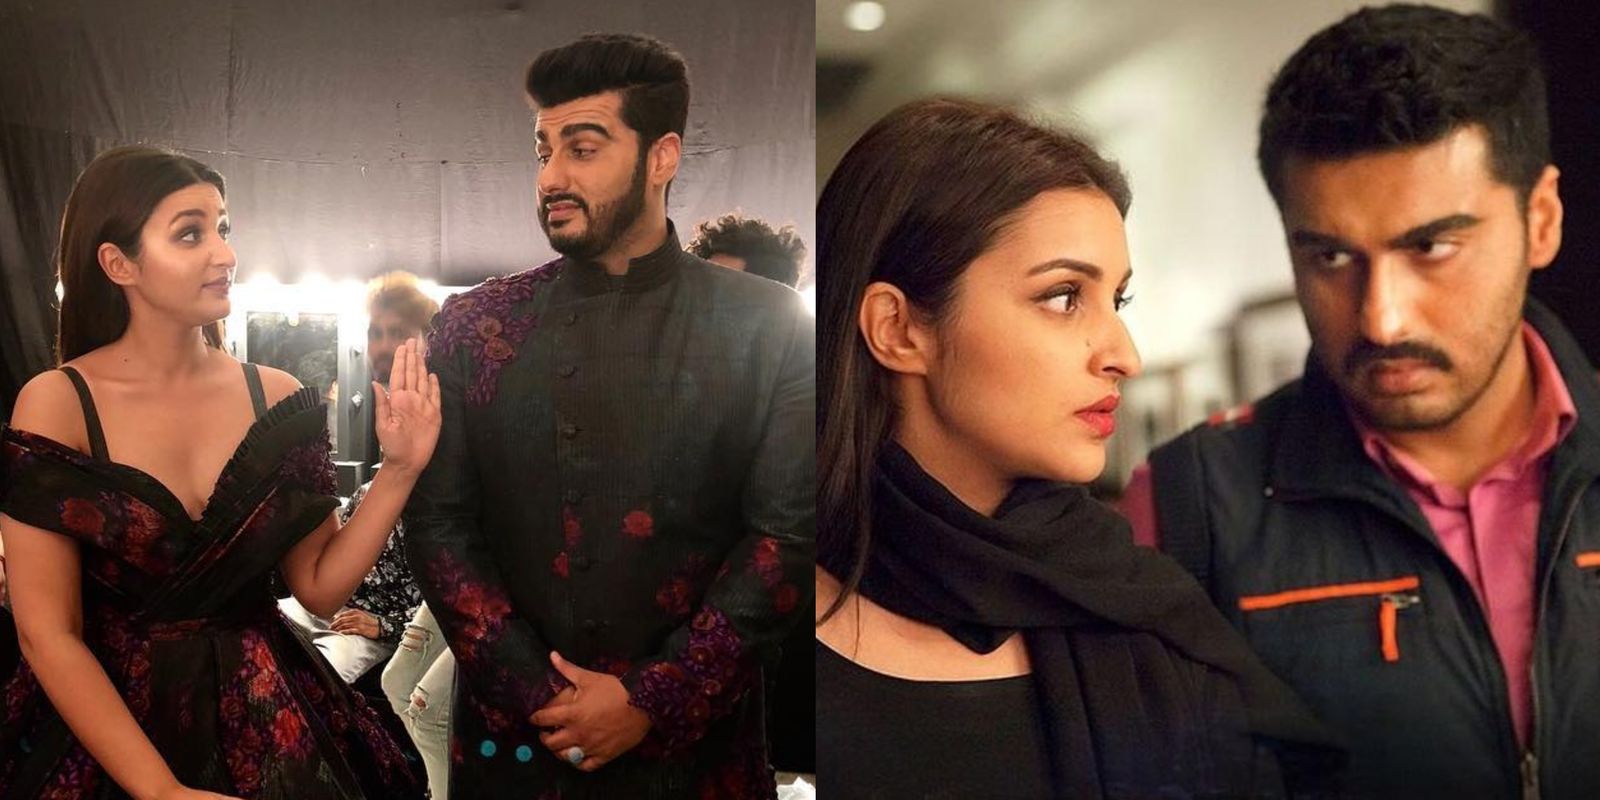 Exclusive- Parineeti Chopra Calls Arjun A Sandeep In Real Life; Says ‘He Should Try And Be A Little More Pinky’